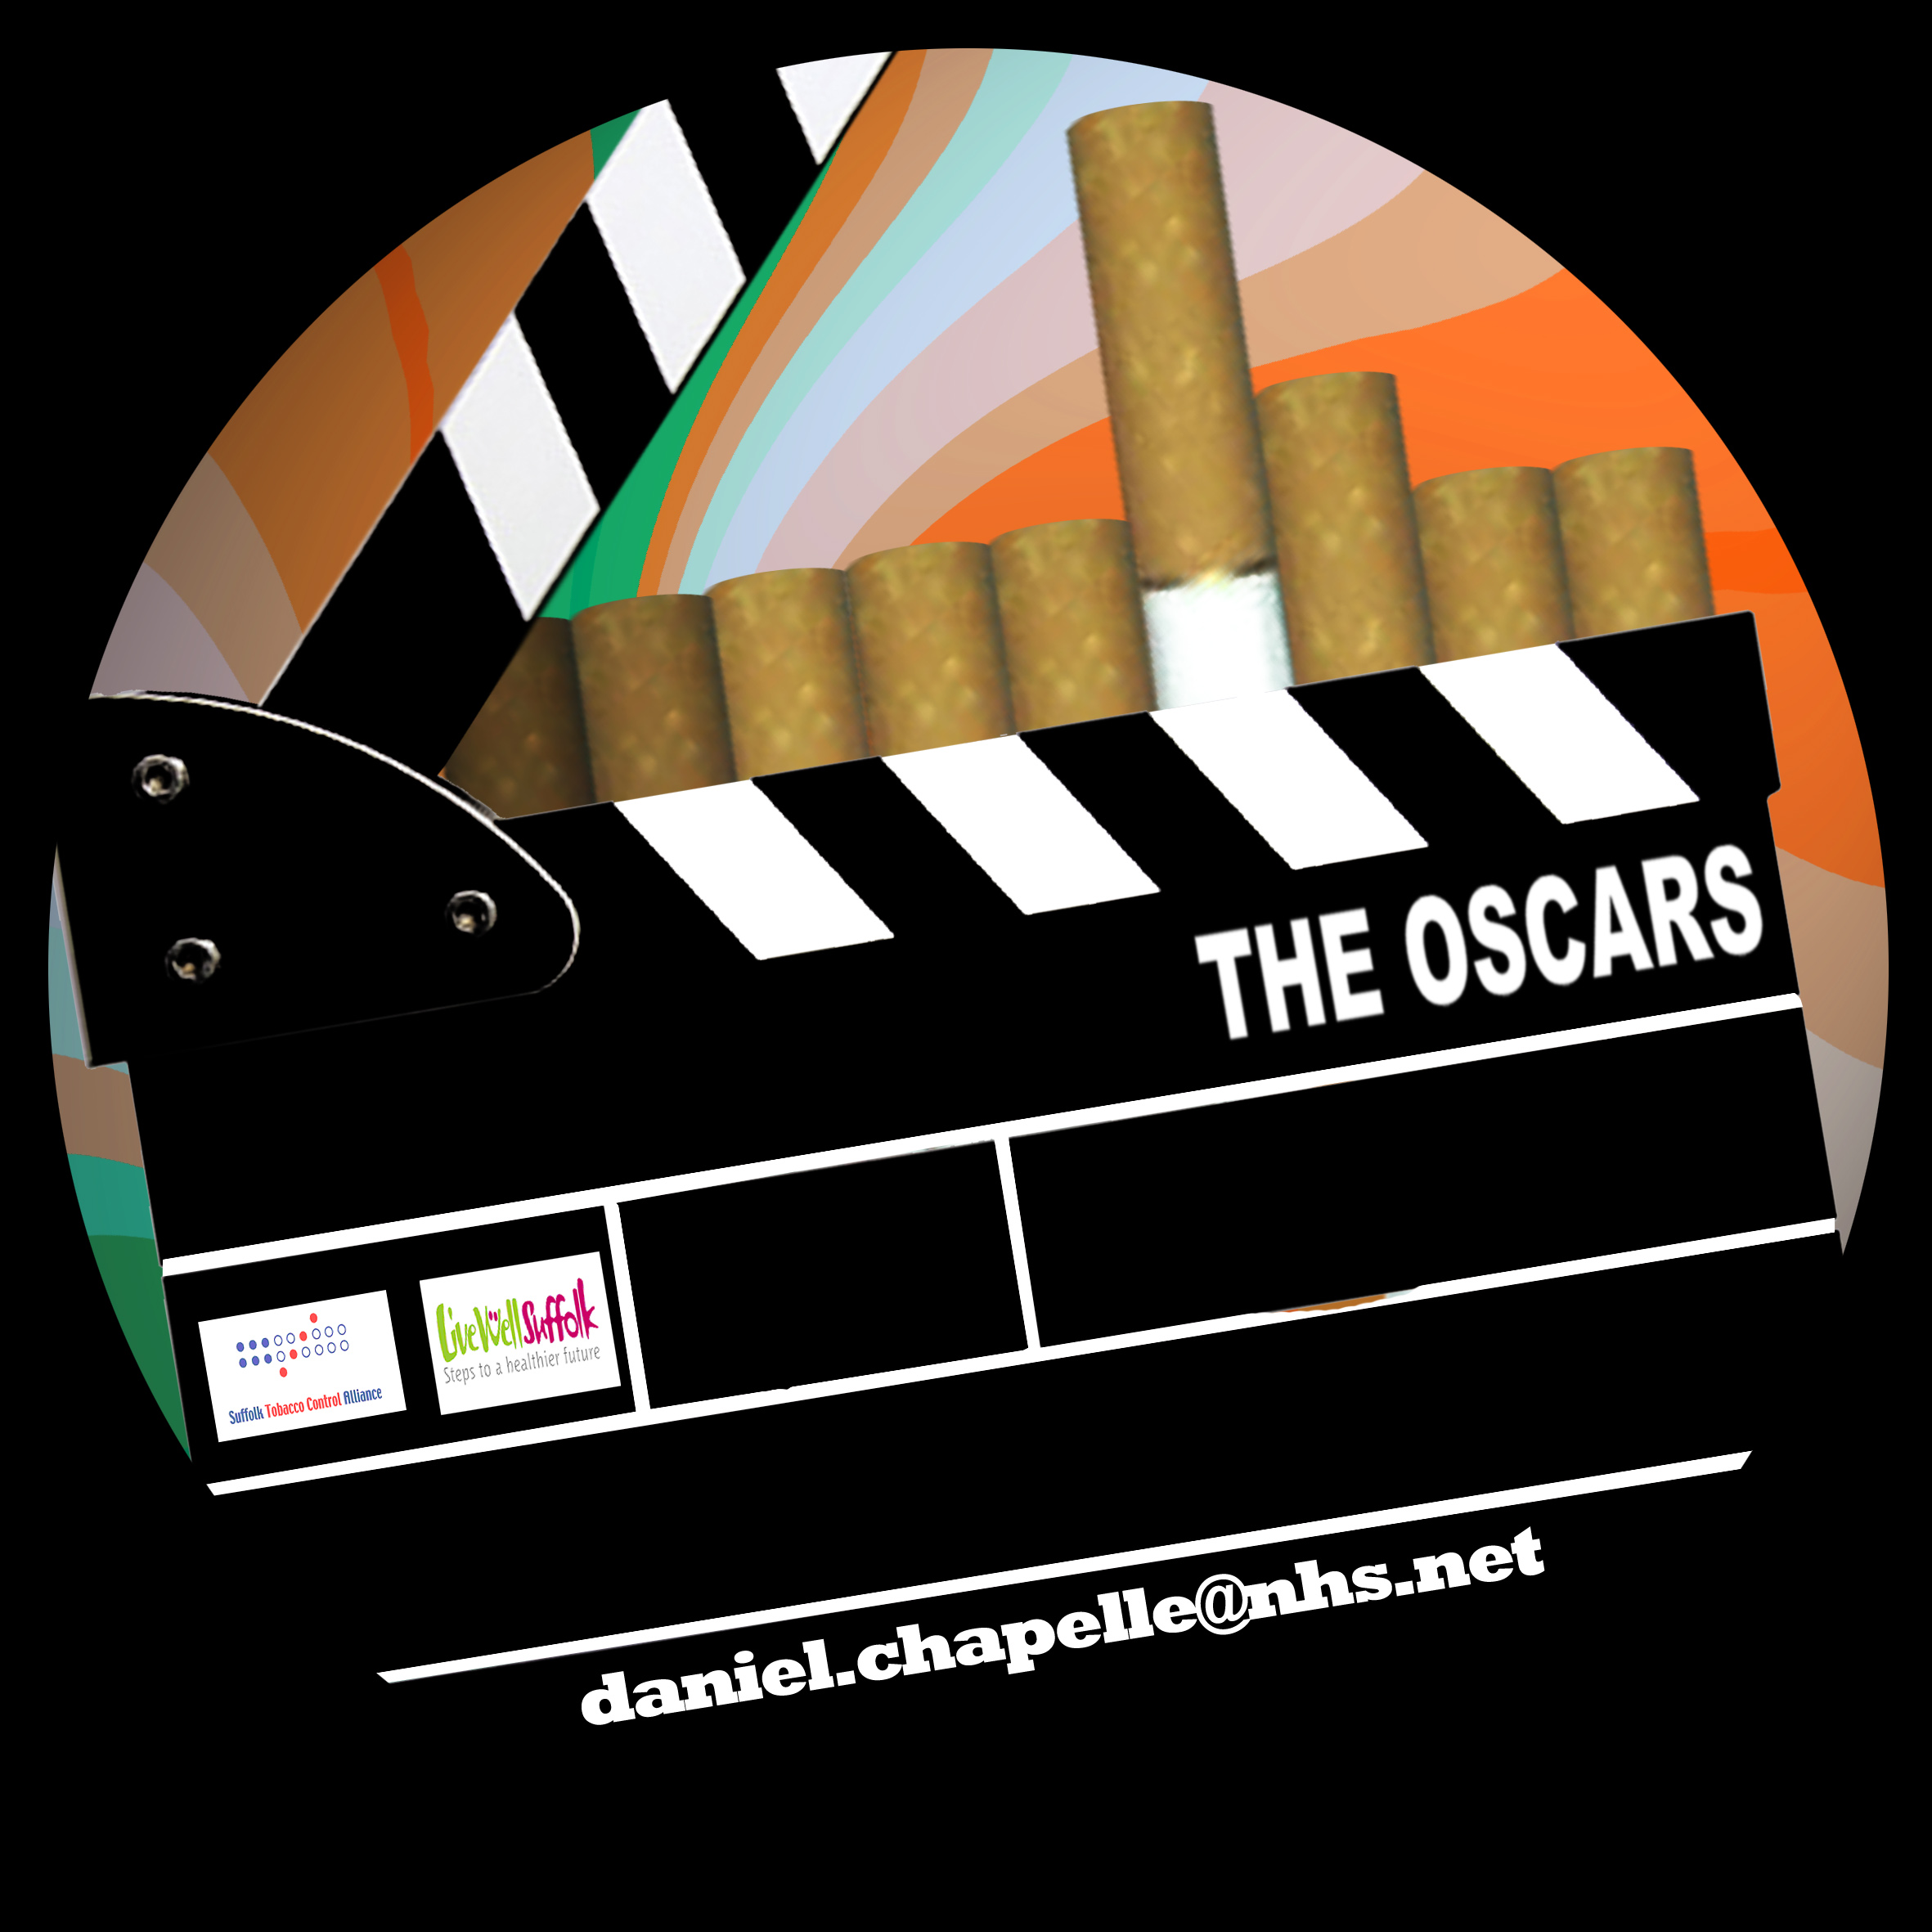 The Oscars 2011 - A film competition for schools